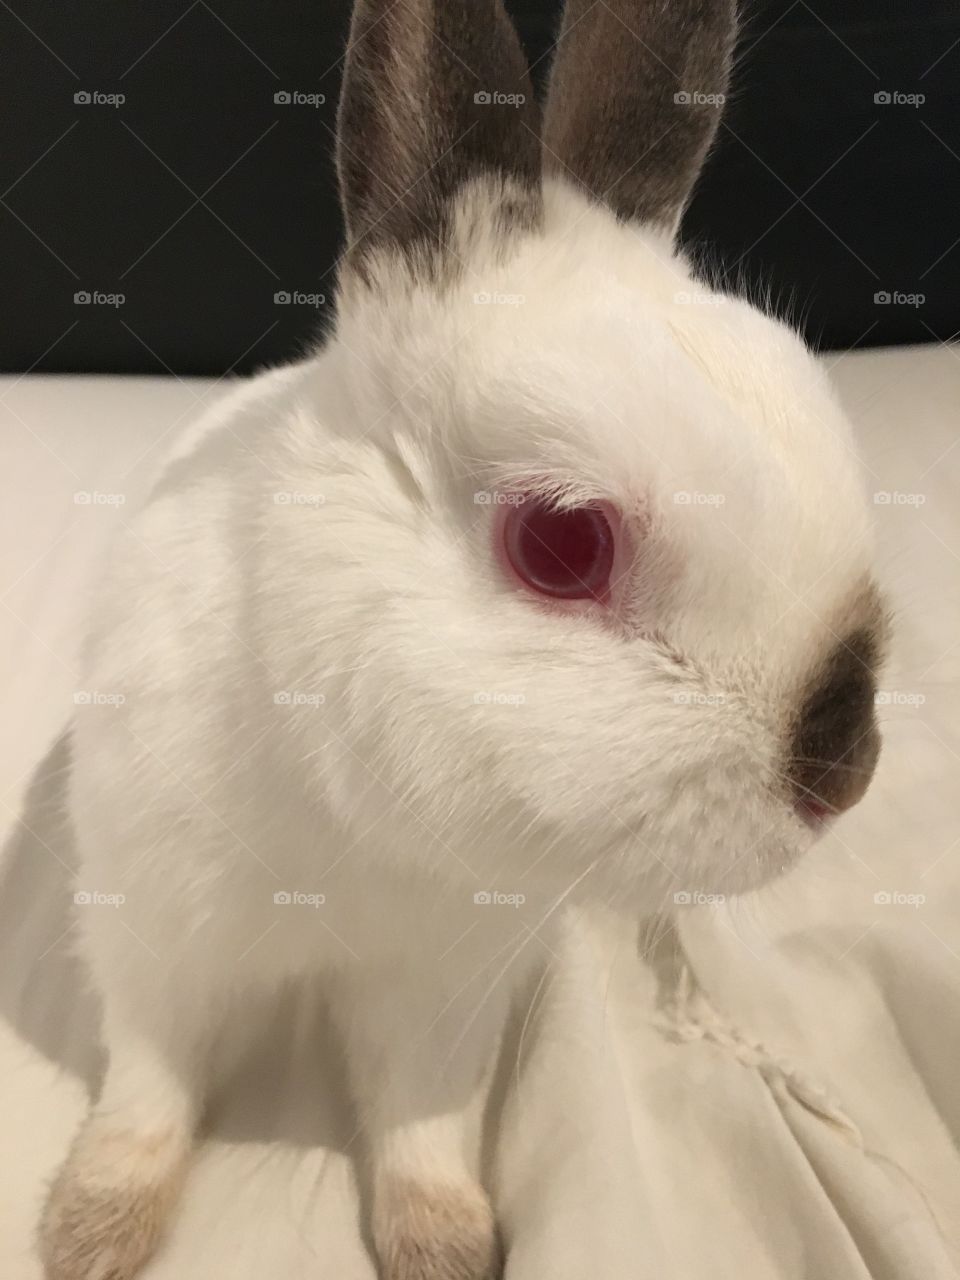 I took This photo of My bunny Pelle and It looks so great ❤️